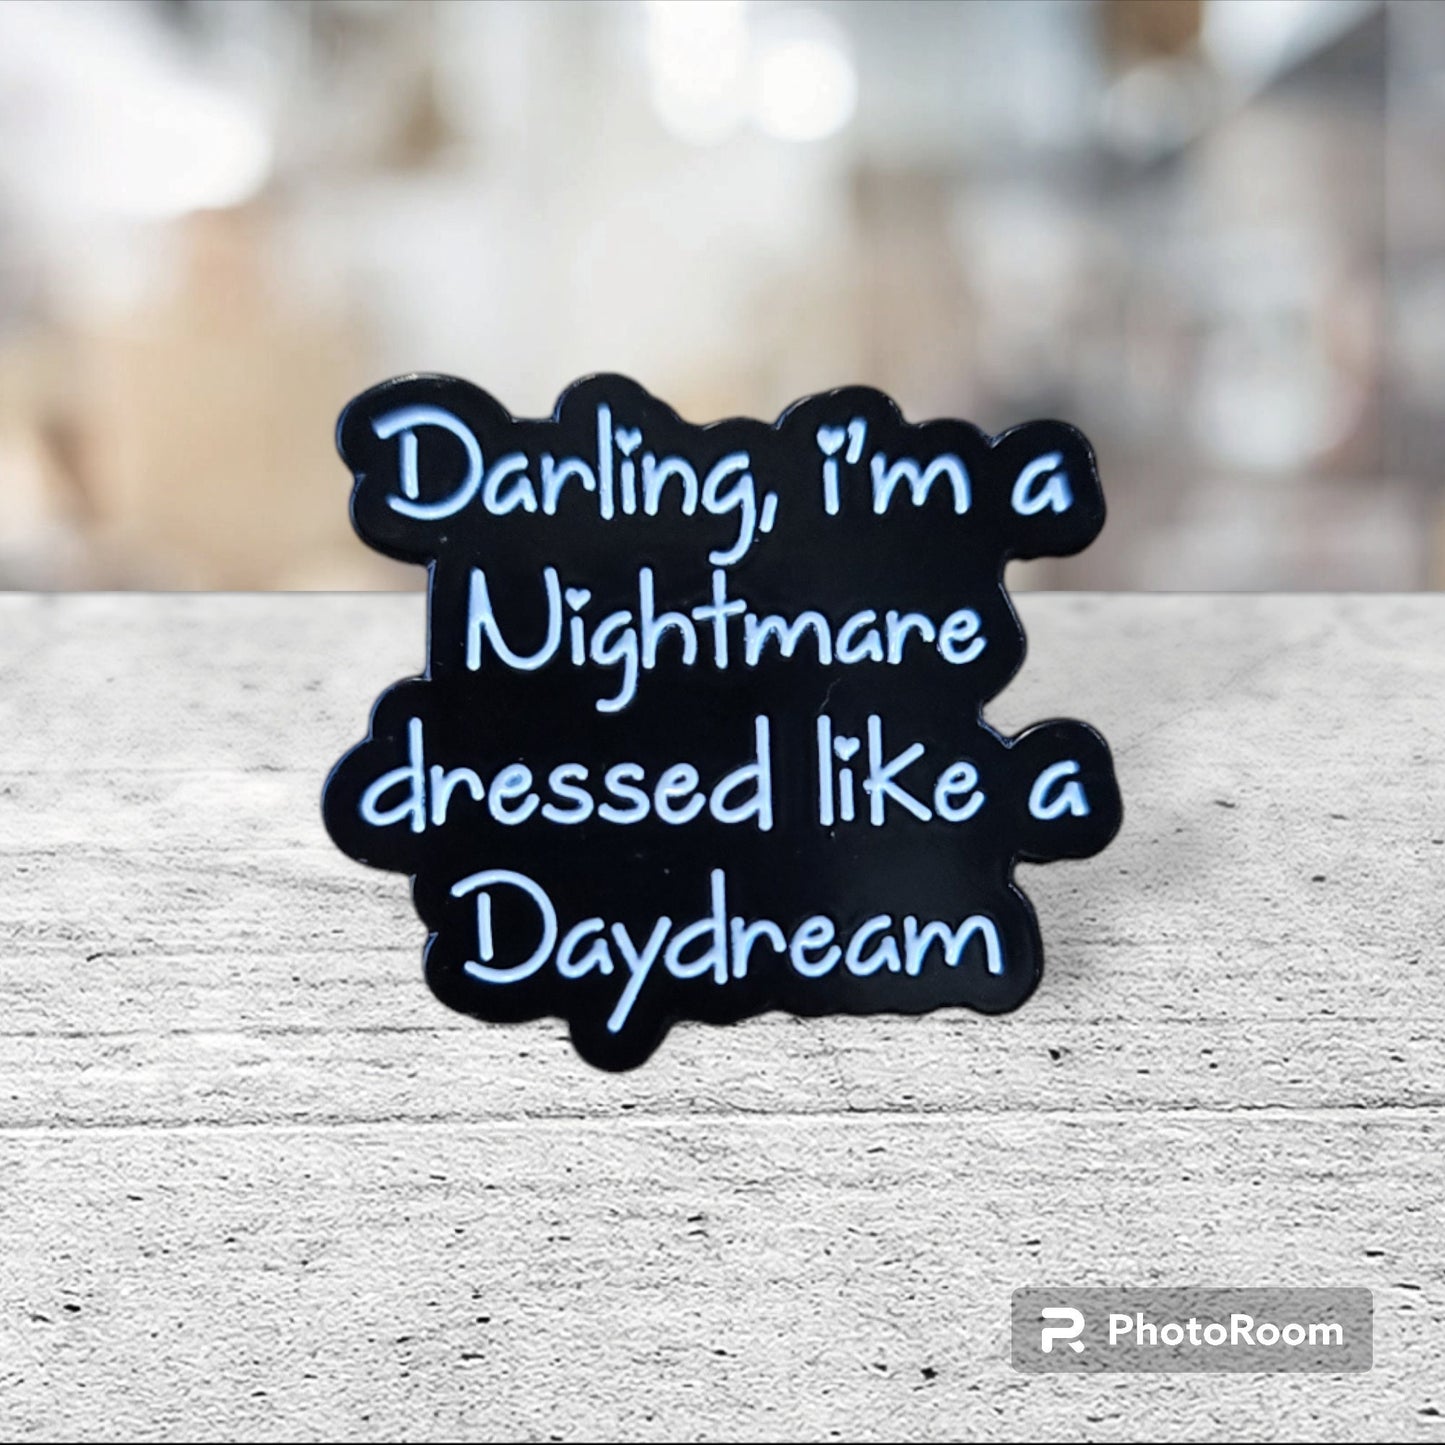 Taylor Swift Inspired Pin, Blank Space Inspired Pin, Gift for Swifties, Darling I'm a Nightmare dressed like a Daydream, Taylor Swift Pin